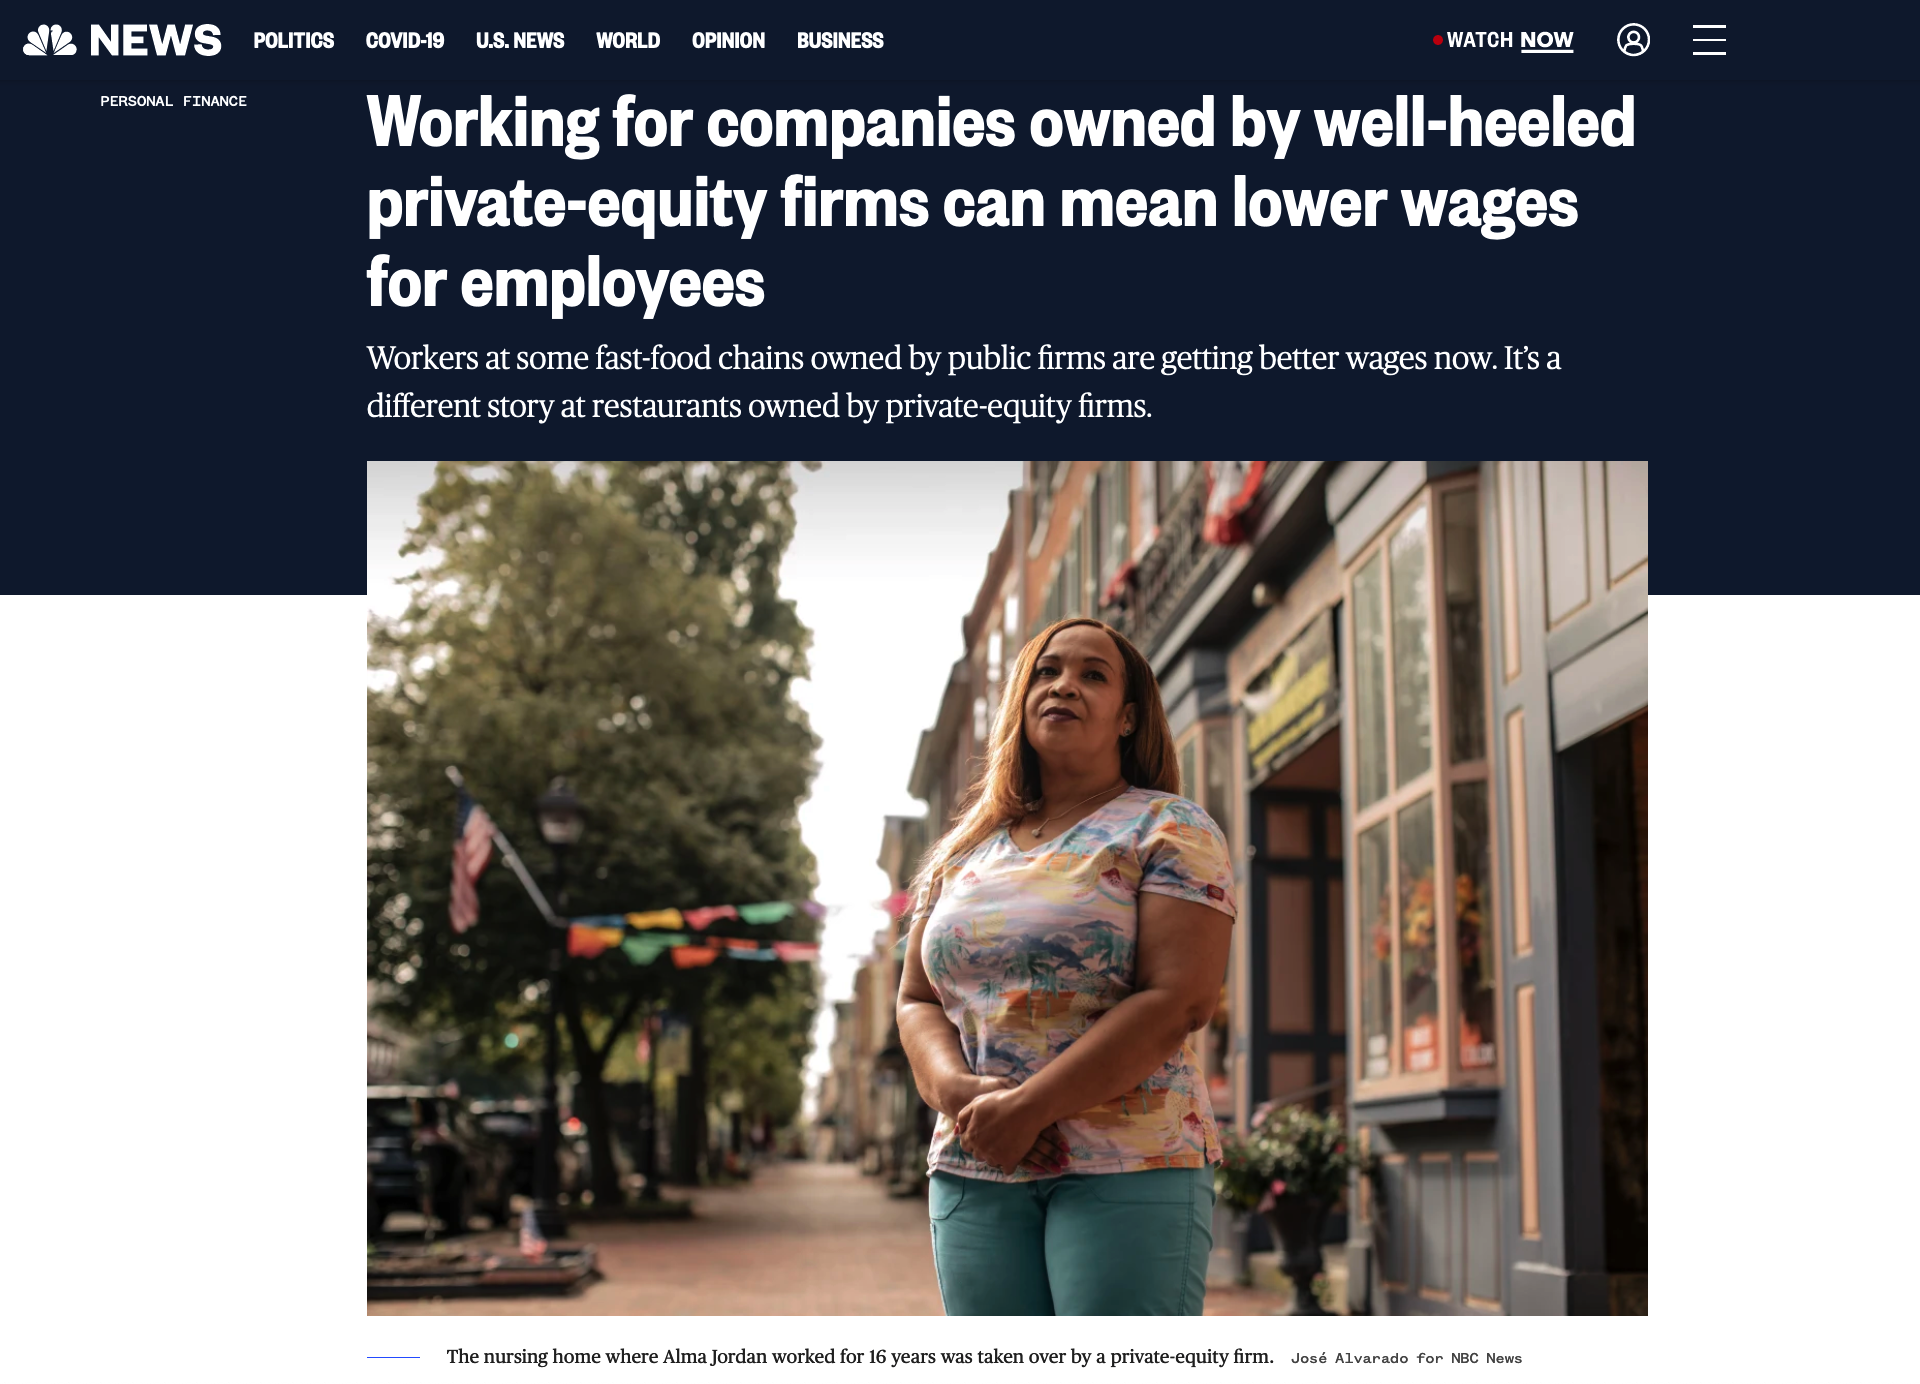 Thumbnail of for NBC News: Working for companies owned by well-heeled private-equity firms can mean lower wages for employees